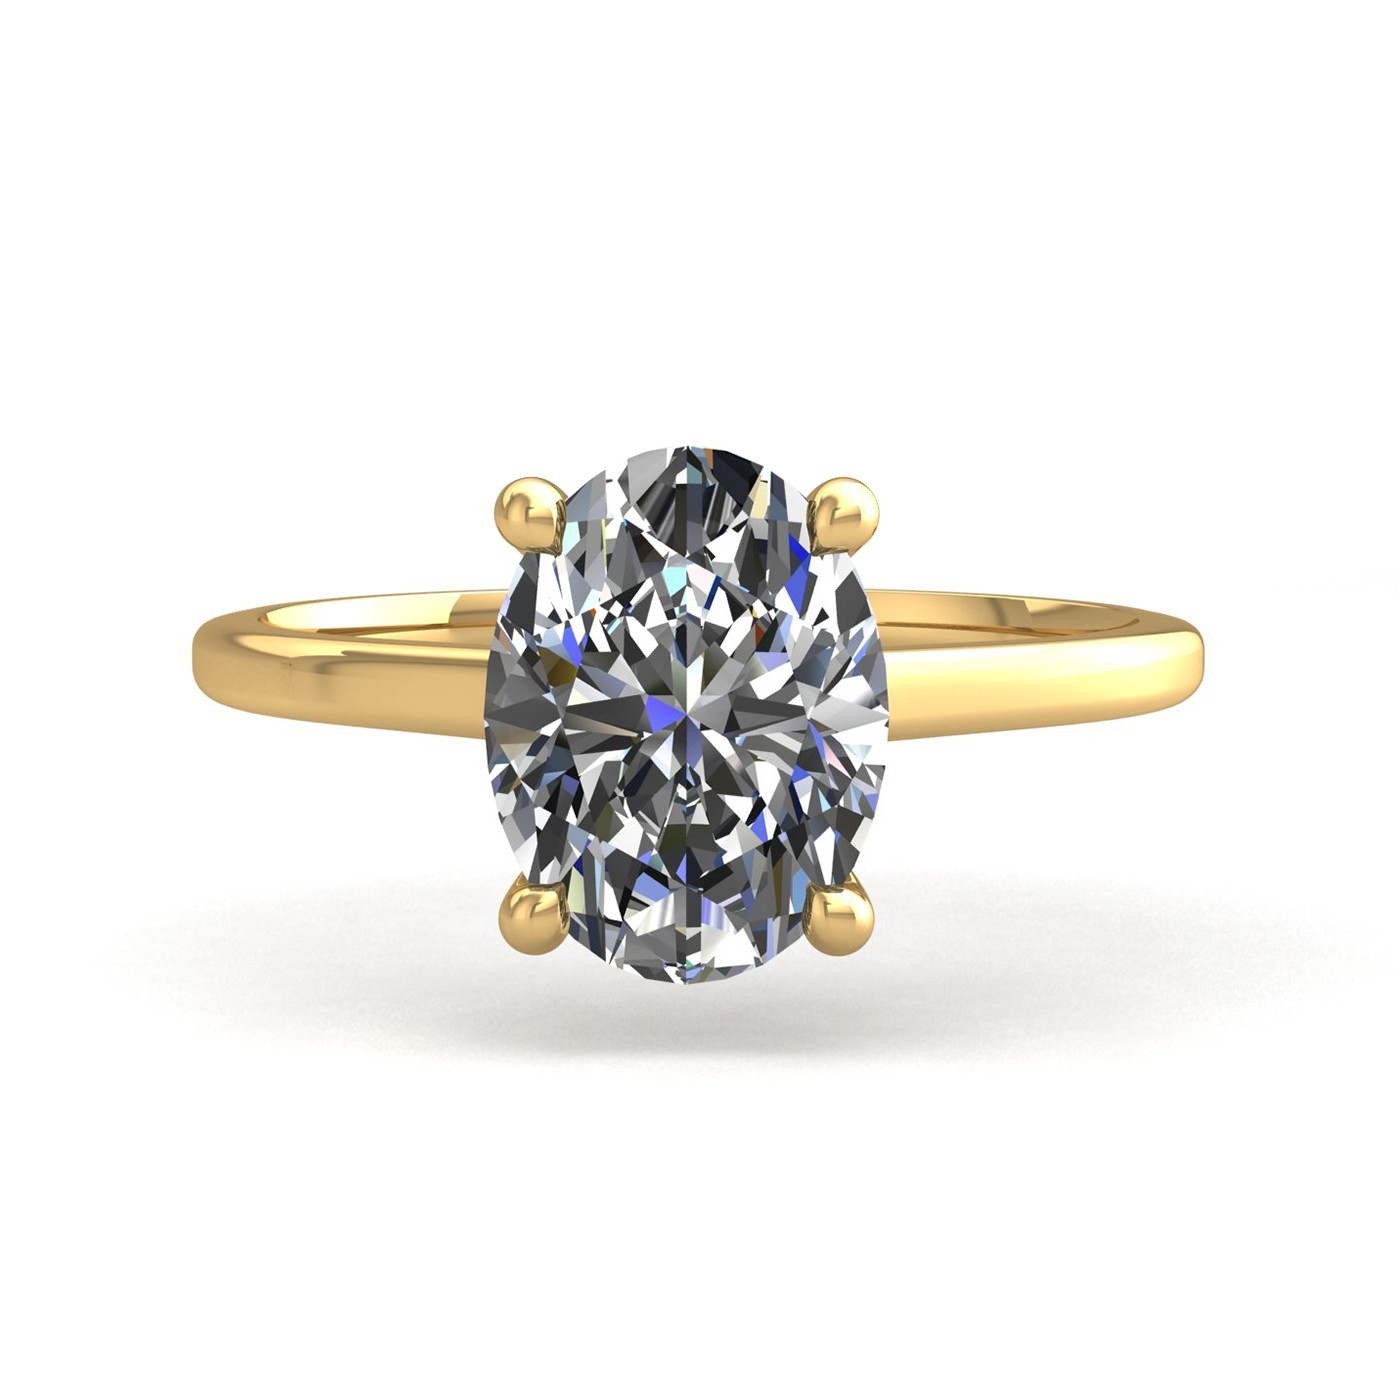 18k yellow gold  1,50 ct 4 prongs solitaire oval cut diamond engagement ring with whisper thin band